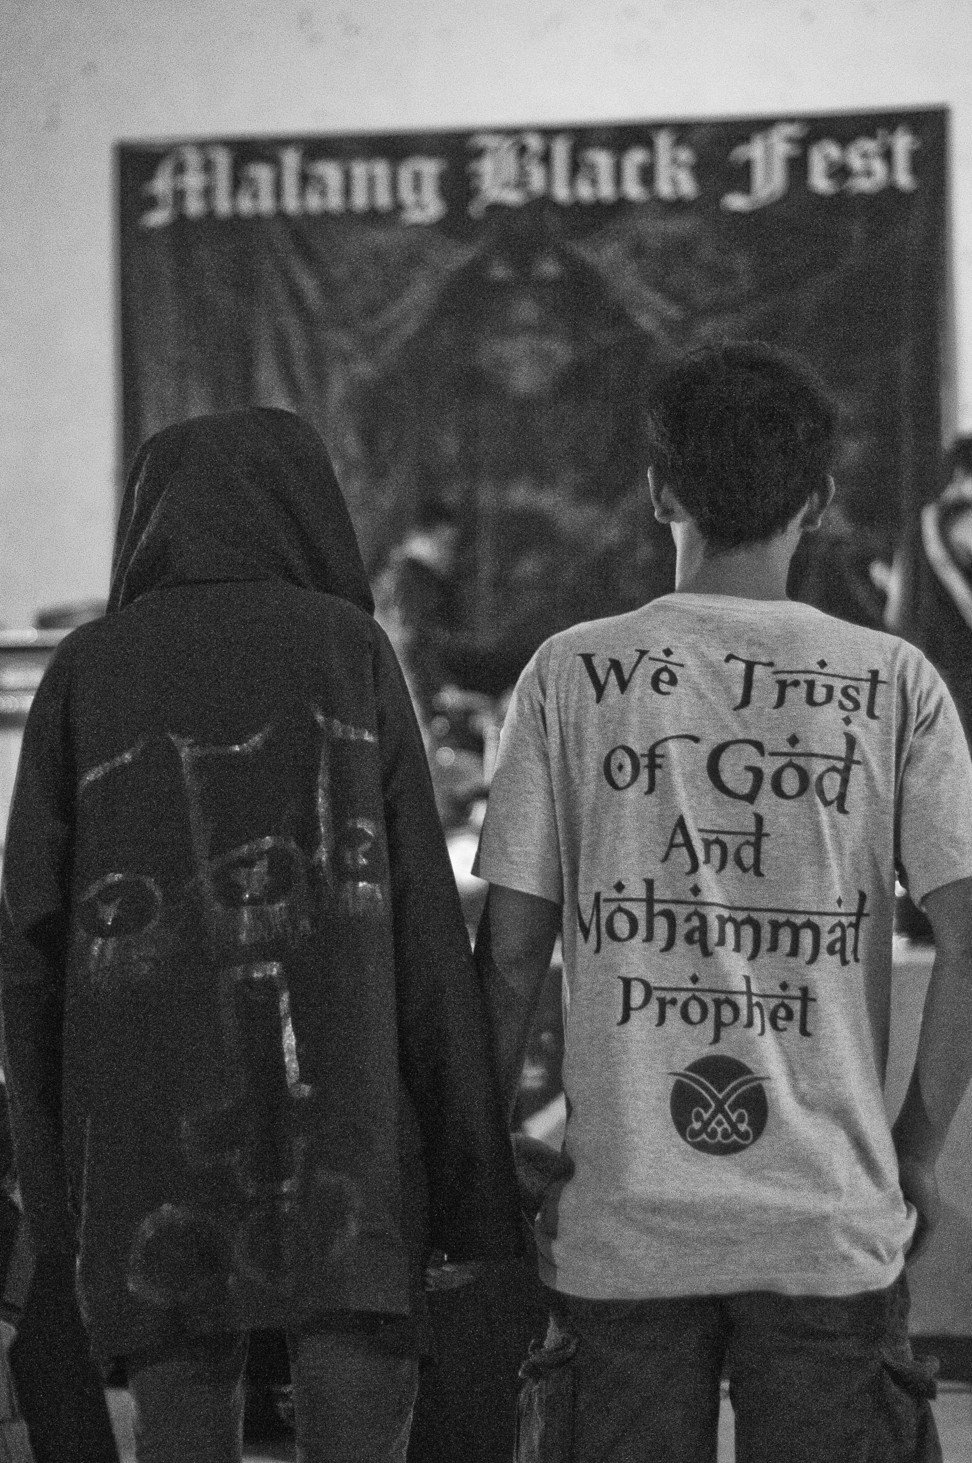 At a black metal show in Malang, East Java, a young Indonesian (left) wearing a cowl with 666 and an inverted crucifix stands next to another man wearing a T-shirt that praises god and the prophet Muhammad. Photo: Gede Adhiputra